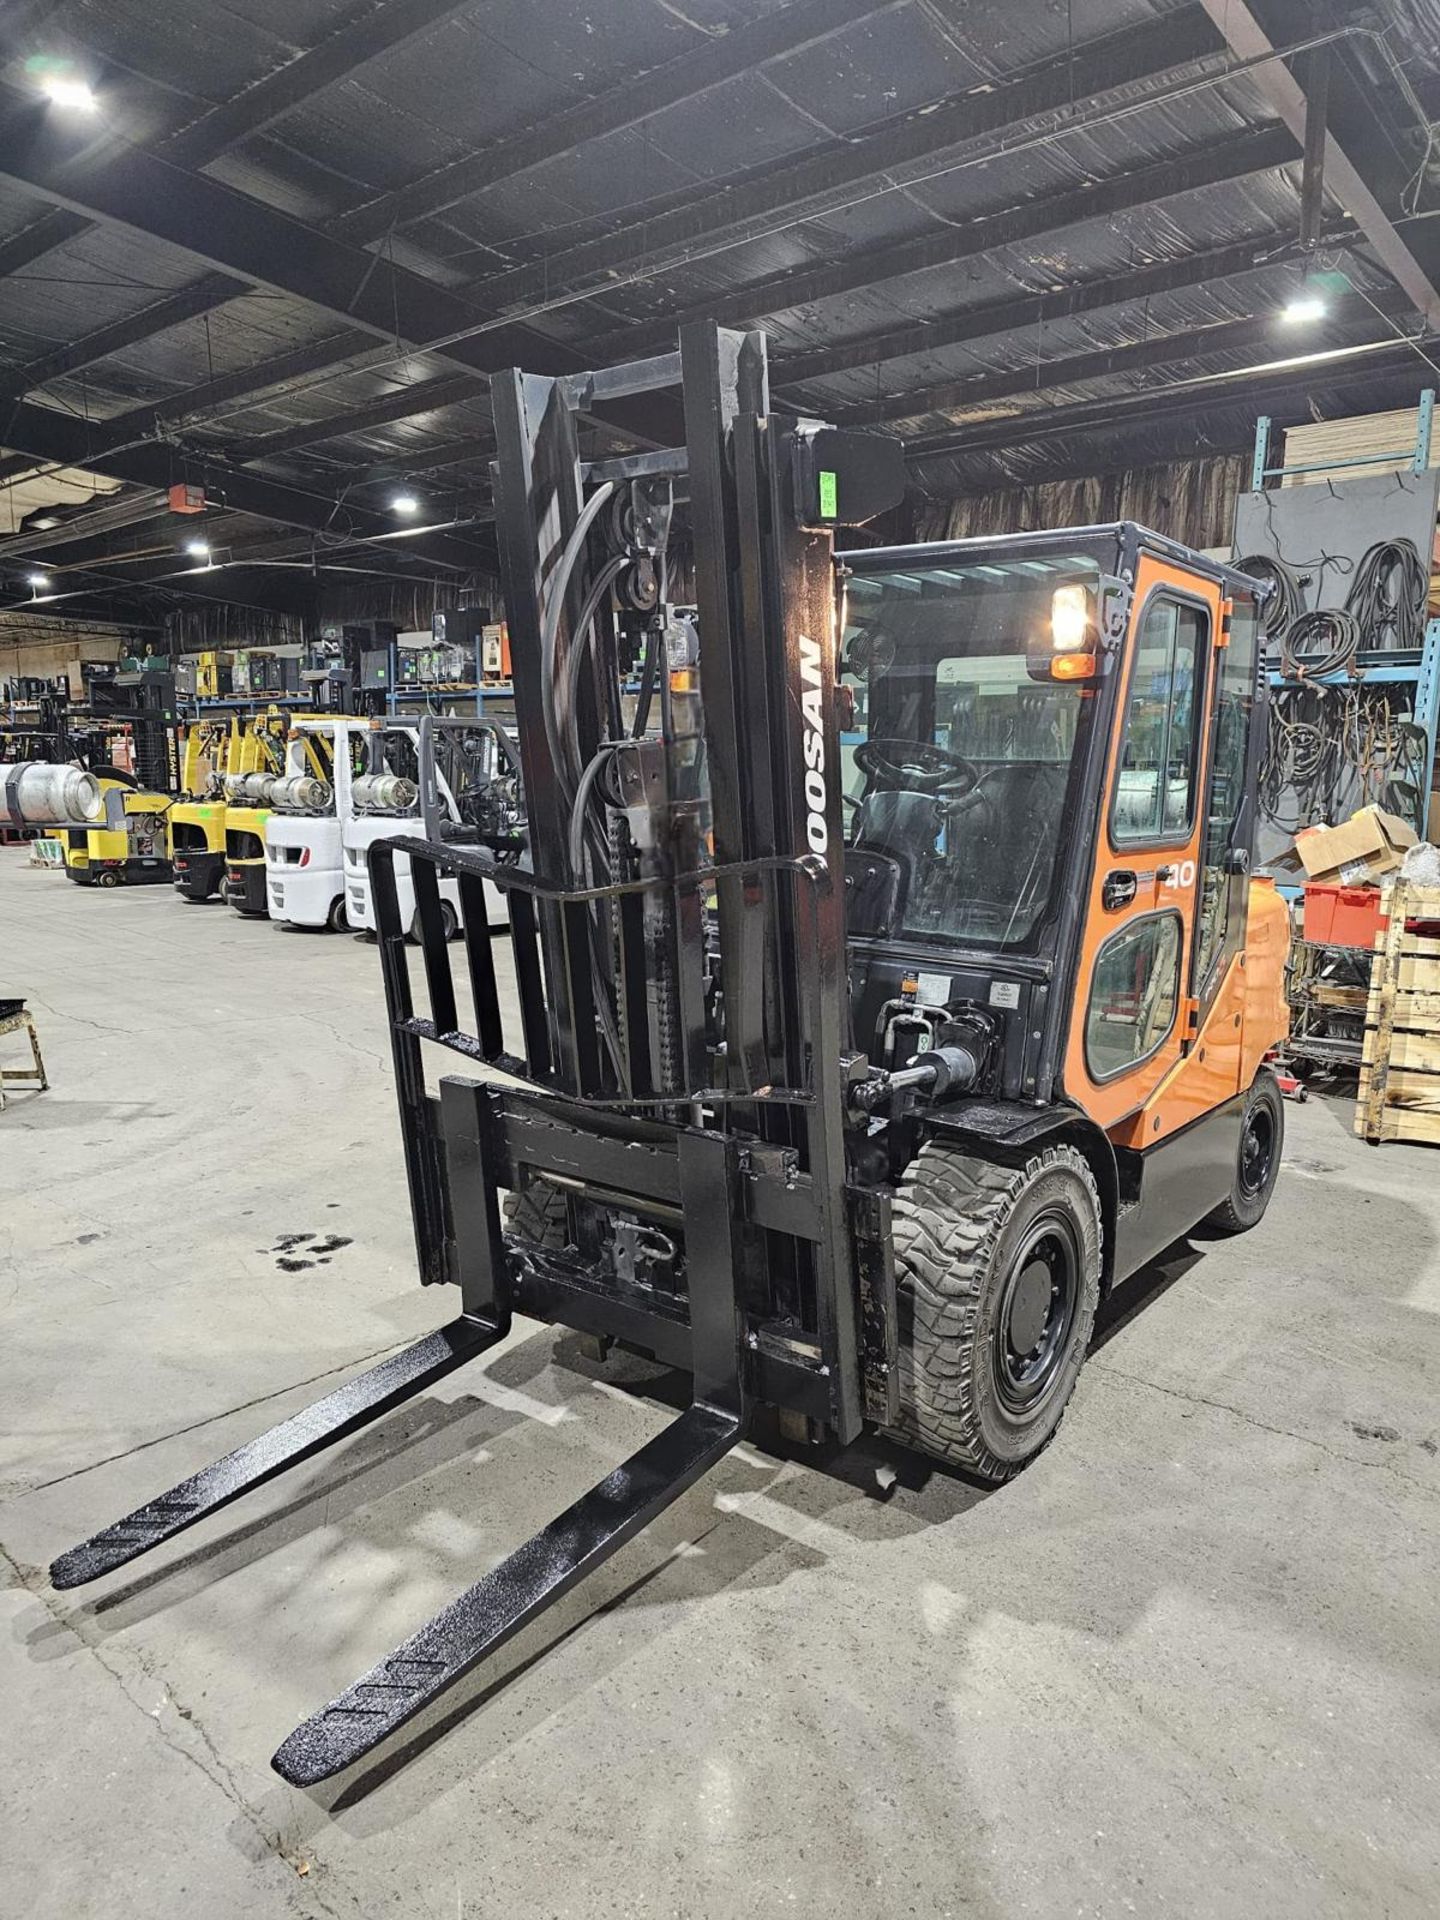 2017 Doosan 8,000 Capacity OUTDOOR LPG (Propane) Forklift with sideshift & 3-STAGE MAST 185" load - Image 7 of 8